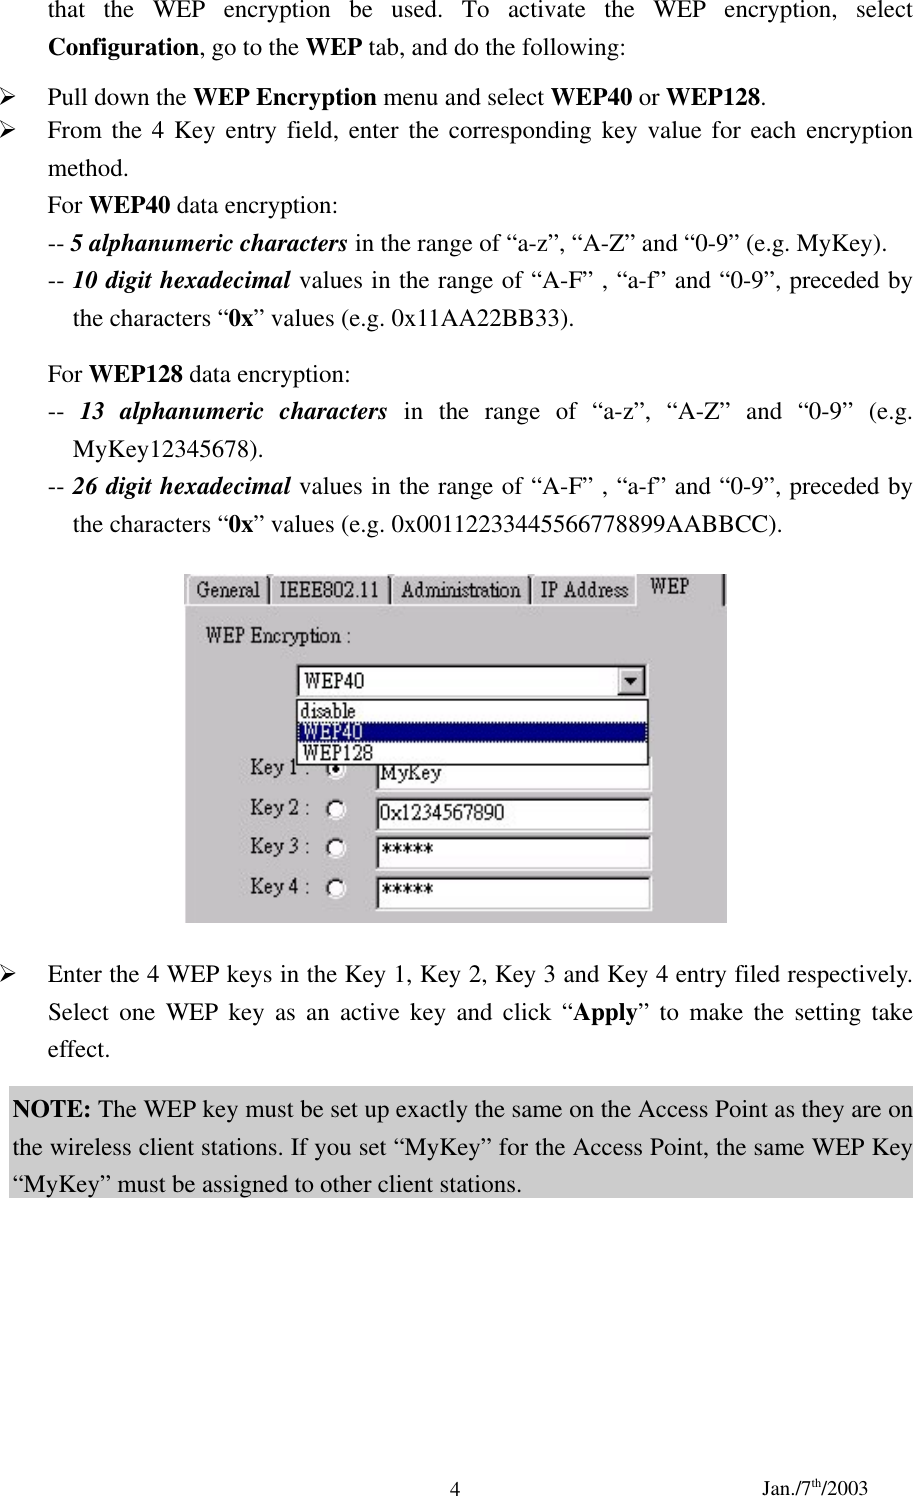 Jan./7th/20034that the WEP encryption be used. To activate the WEP encryption, selectConfiguration, go to the WEP tab, and do the following:¾ Pull down the WEP Encryption menu and select WEP40 or WEP128.¾ From the 4 Key entry field, enter the corresponding key value for each encryptionmethod.For WEP40 data encryption:-- 5 alphanumeric characters in the range of “a-z”, “A-Z” and “0-9” (e.g. MyKey).-- 10 digit hexadecimal values in the range of “A-F” , “a-f” and “0-9”, preceded bythe characters “0x” values (e.g. 0x11AA22BB33).For WEP128 data encryption:--  13 alphanumeric characters in the range of “a-z”, “A-Z” and “0-9” (e.g.MyKey12345678).-- 26 digit hexadecimal values in the range of “A-F” , “a-f” and “0-9”, preceded bythe characters “0x” values (e.g. 0x00112233445566778899AABBCC).¾ Enter the 4 WEP keys in the Key 1, Key 2, Key 3 and Key 4 entry filed respectively.Select one WEP key as an active key and click “Apply” to make the setting takeeffect.NOTE: The WEP key must be set up exactly the same on the Access Point as they are onthe wireless client stations. If you set “MyKey” for the Access Point, the same WEP Key“MyKey” must be assigned to other client stations.